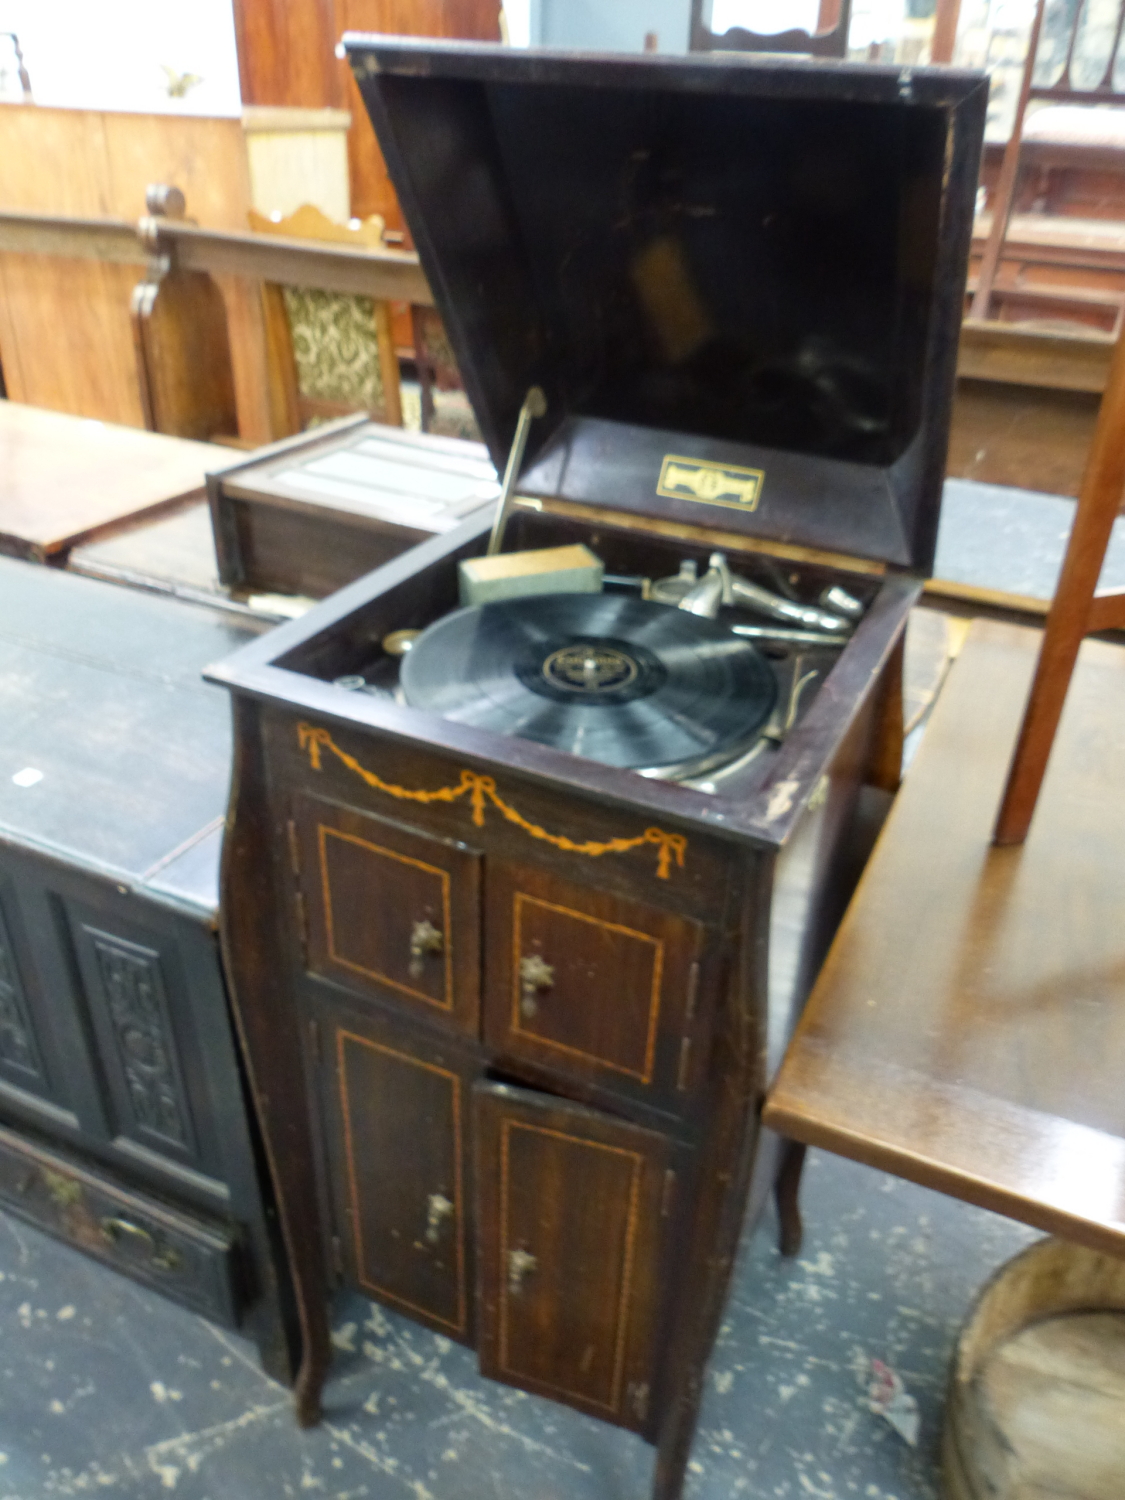 A GOLDEN MELODY WIND UP GRAMOPHONE IN STAINED WOOD TABLE CASE